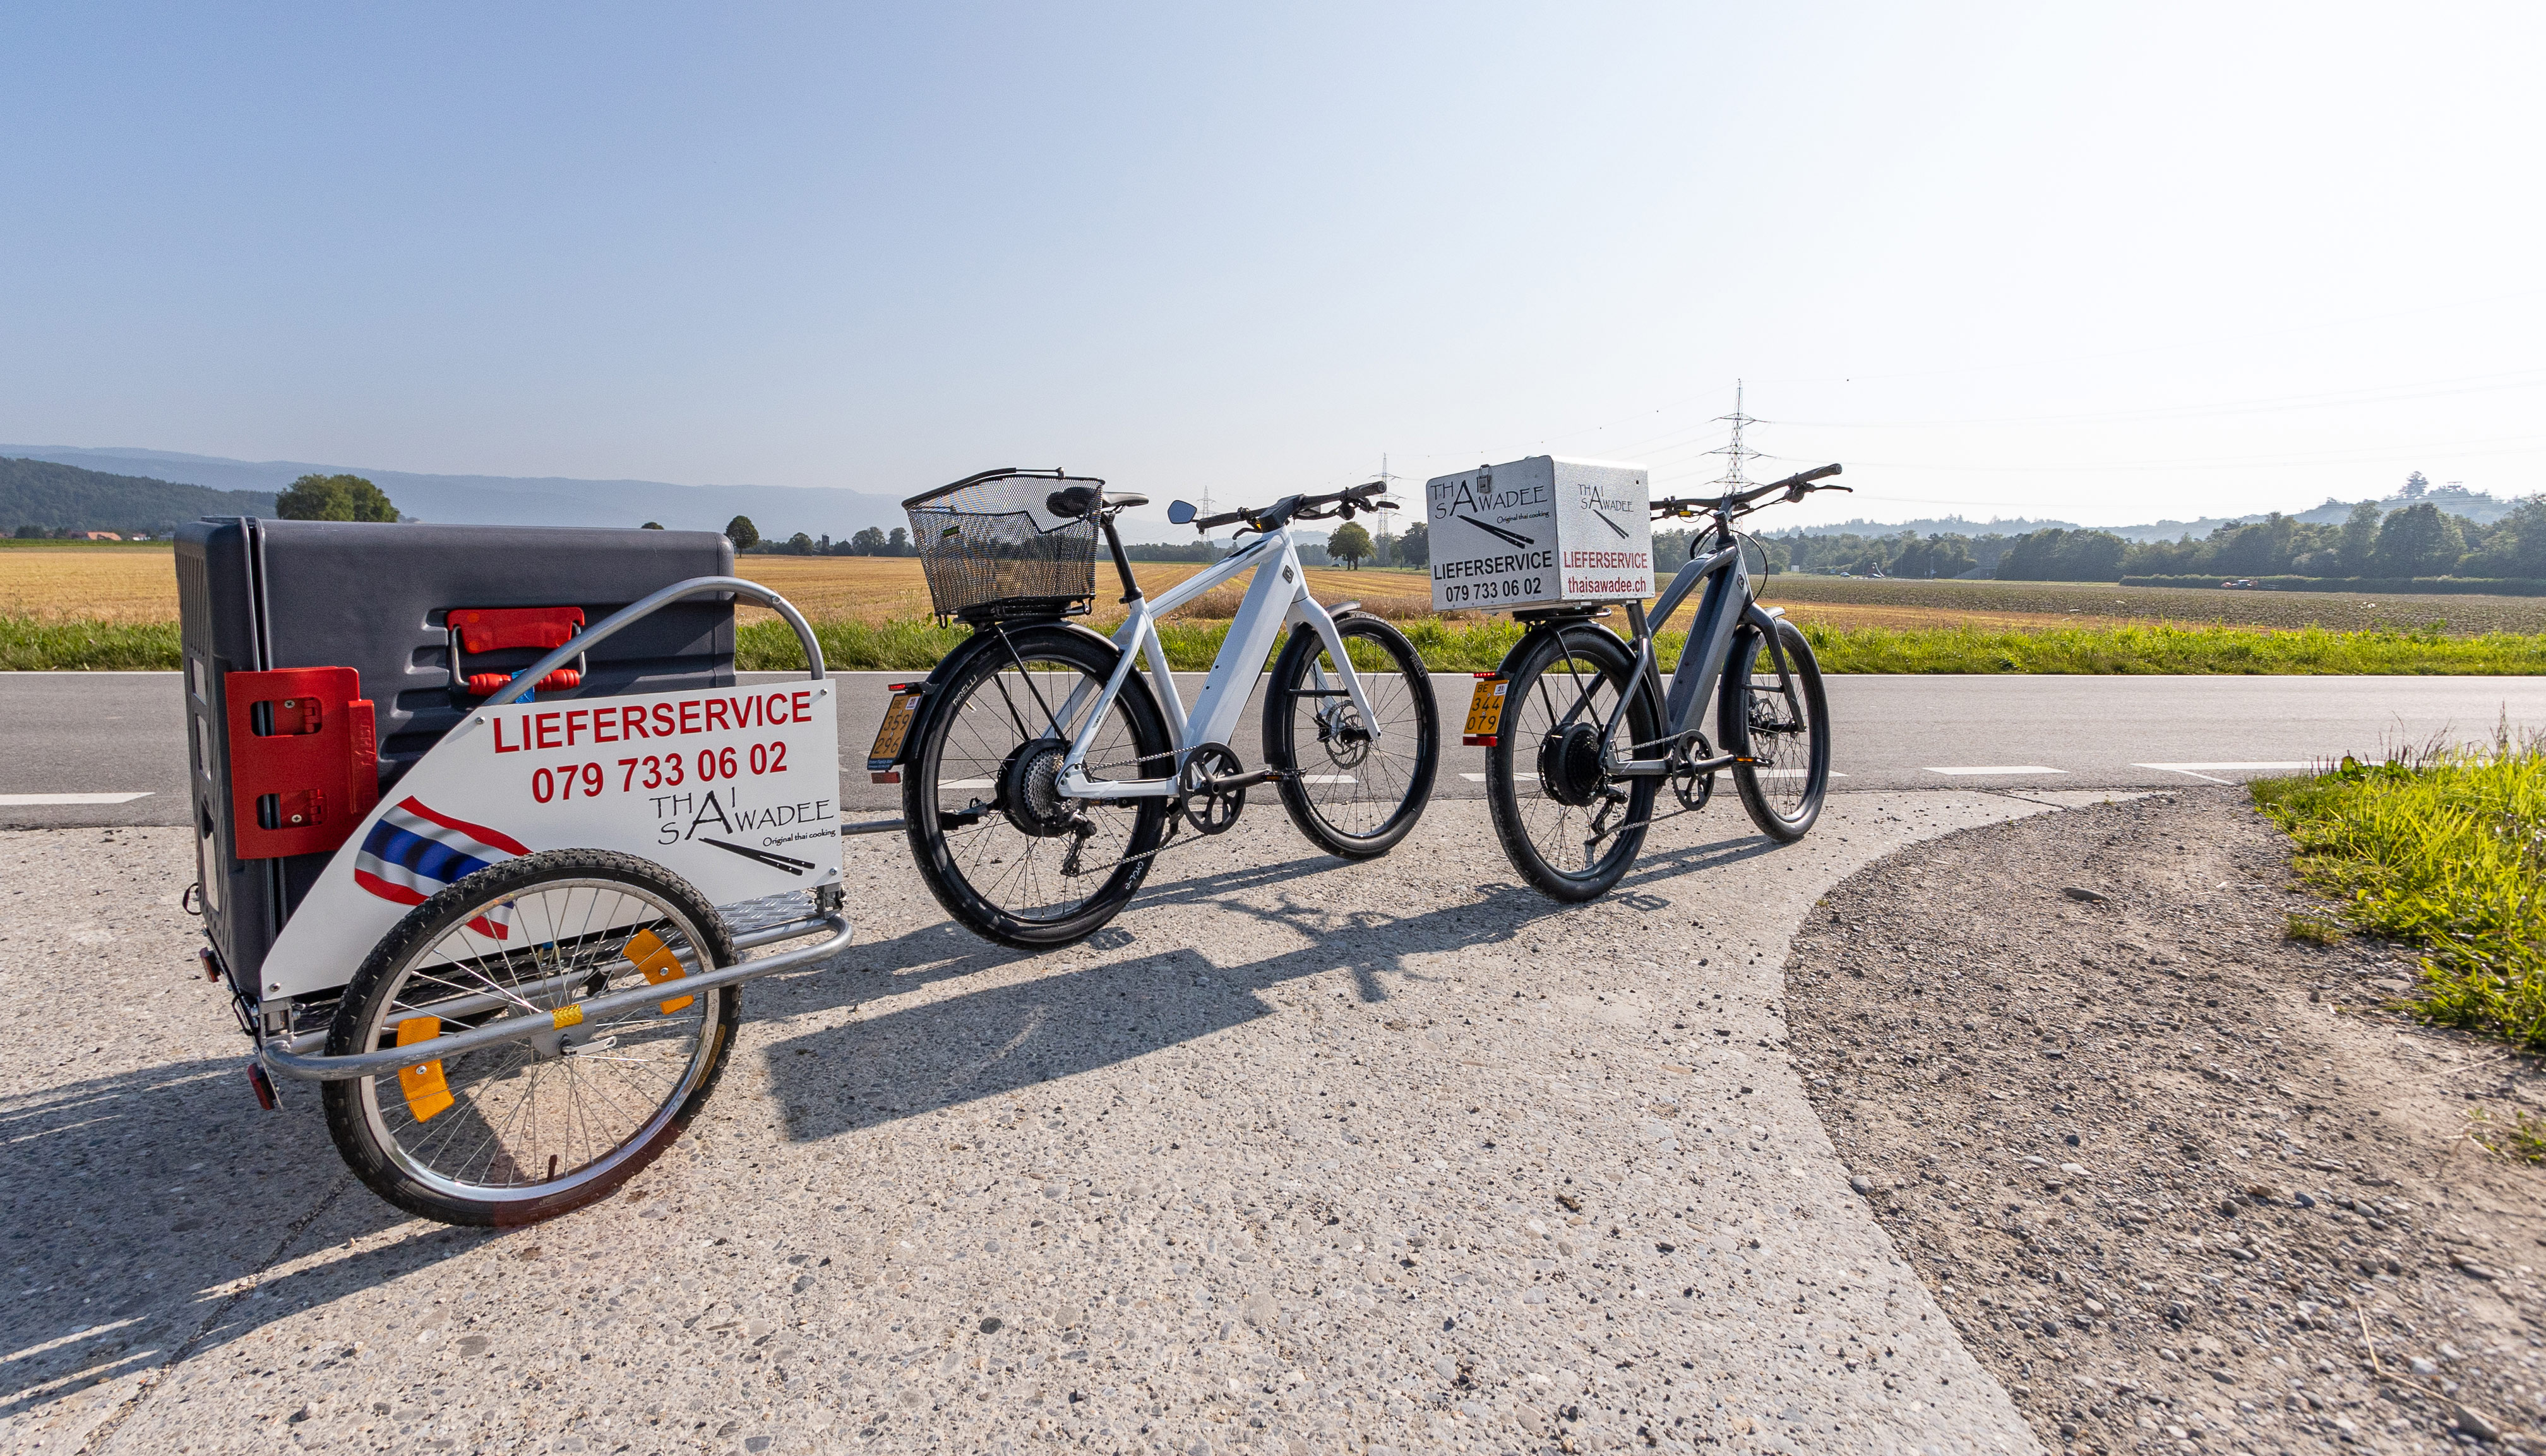 Delivery service becomes child's play with a Stromer e-bike.Delivery service becomes child's play with a Stromer e-bike.